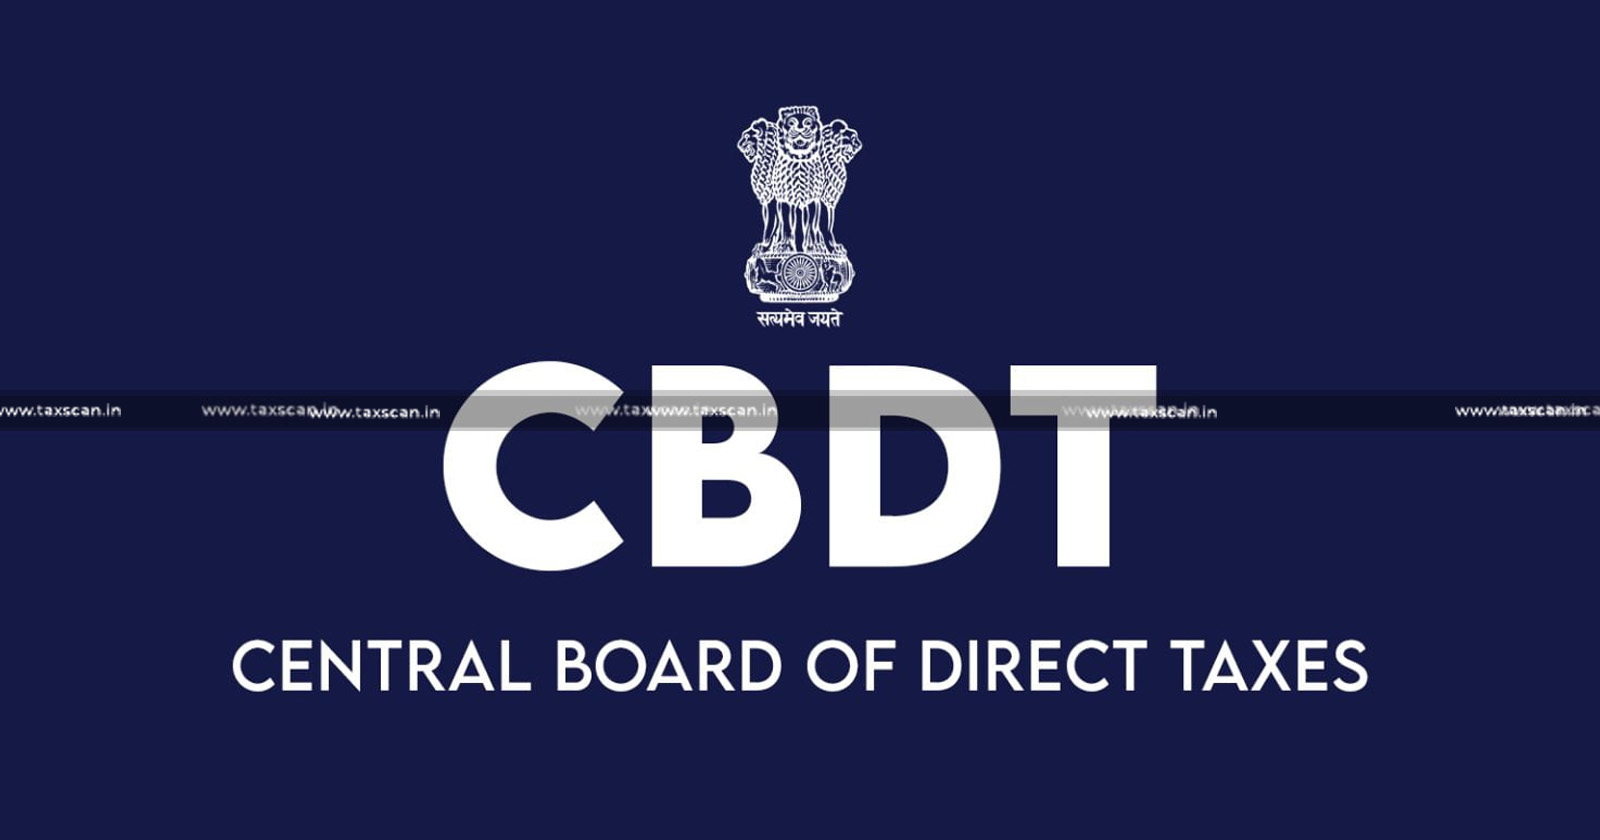 CBDT - Rent-Free Accommodation Provided by Employers to Employees - Rent-Free Accommodation - Employers - Employees -CBDT notifies rules for Valuing Rent-Free Accommodation -Rent-Free Accommodation Provided by Employers- taxscan